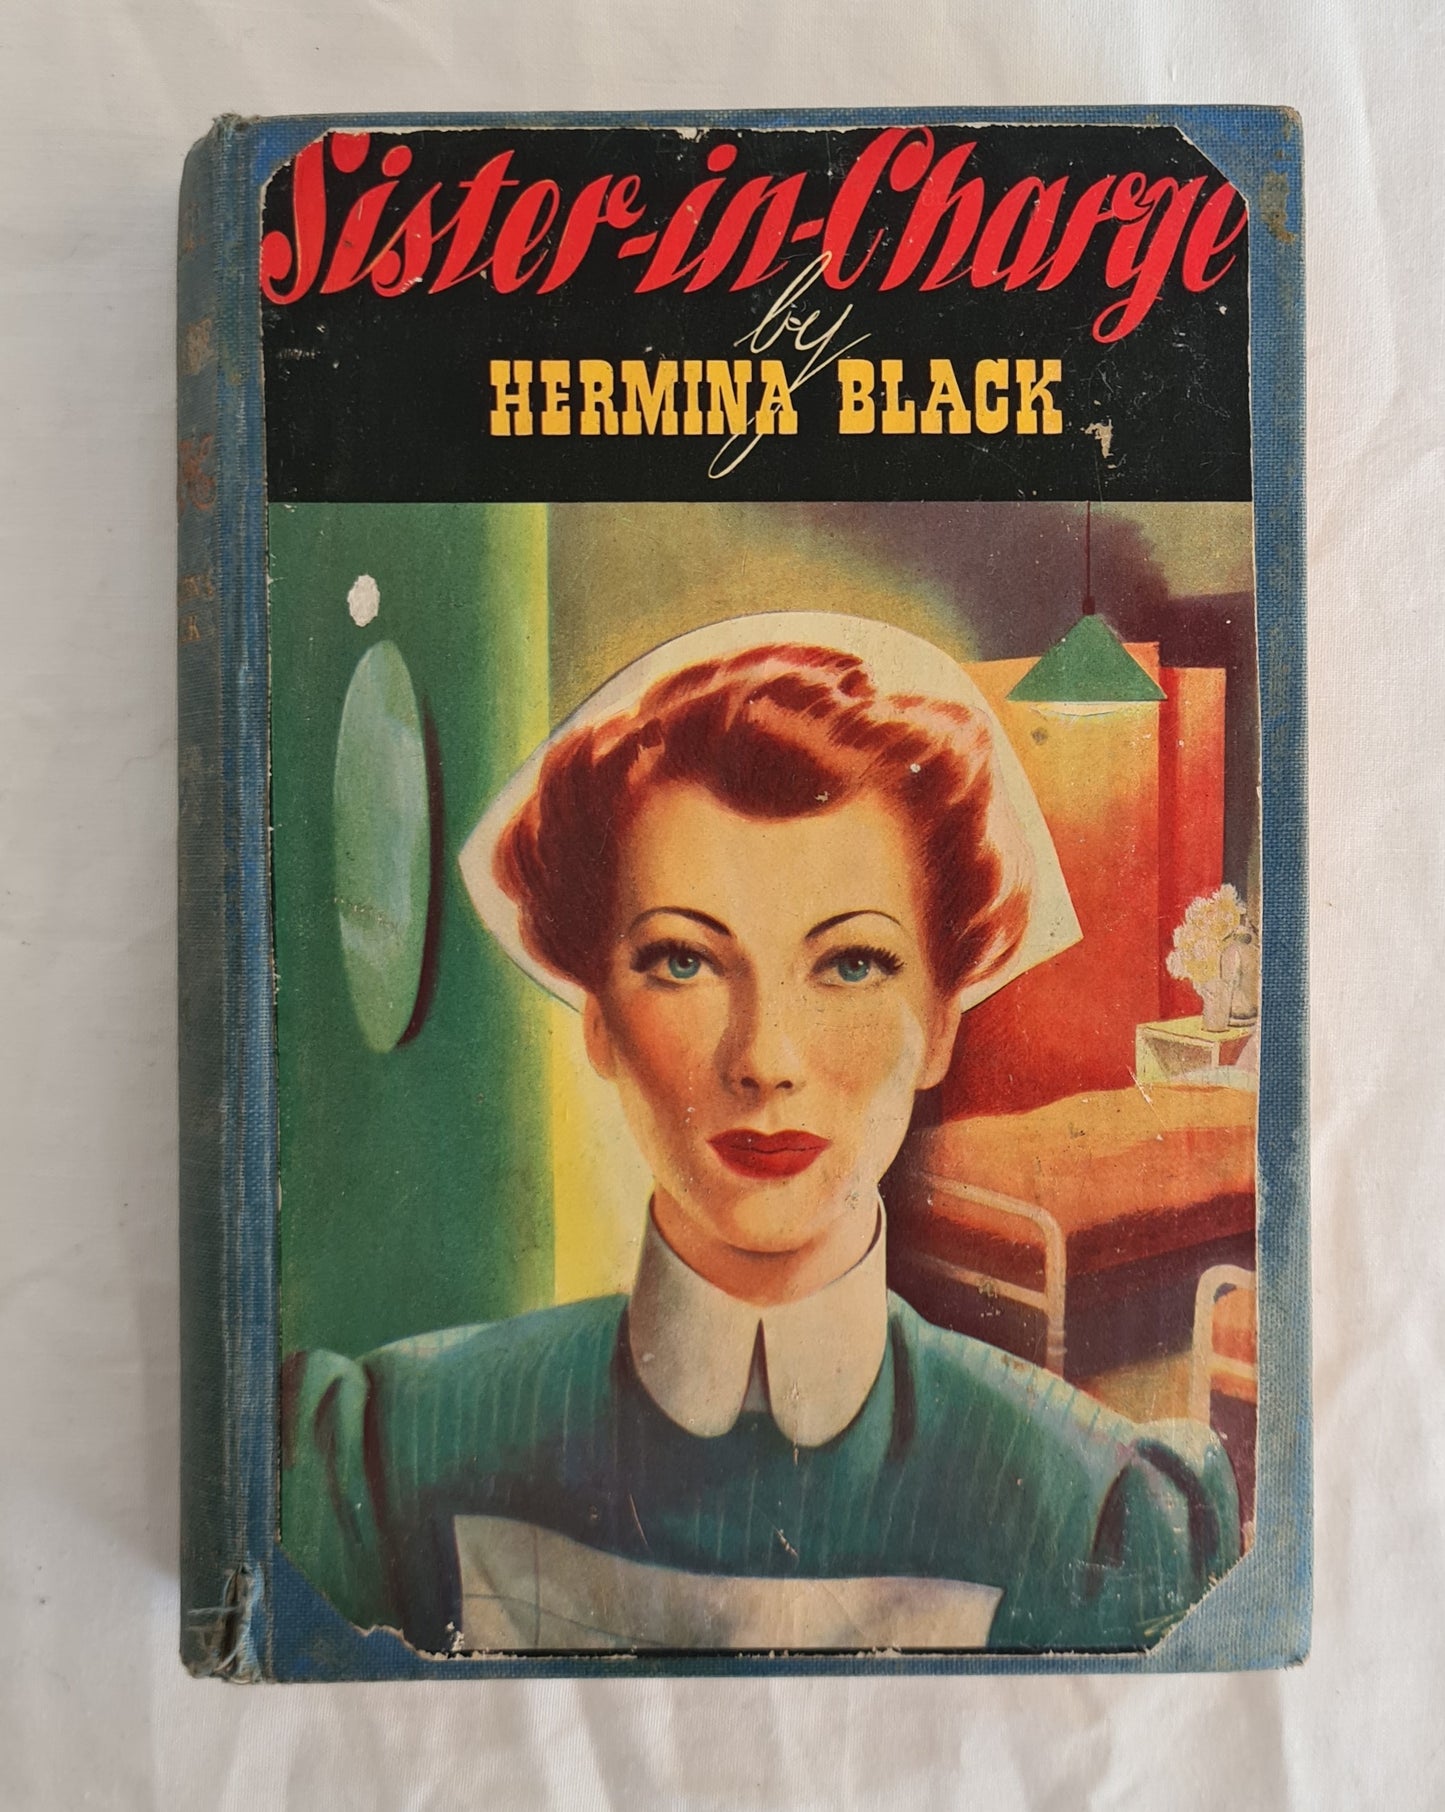 Sister In Charge by Hermina Black